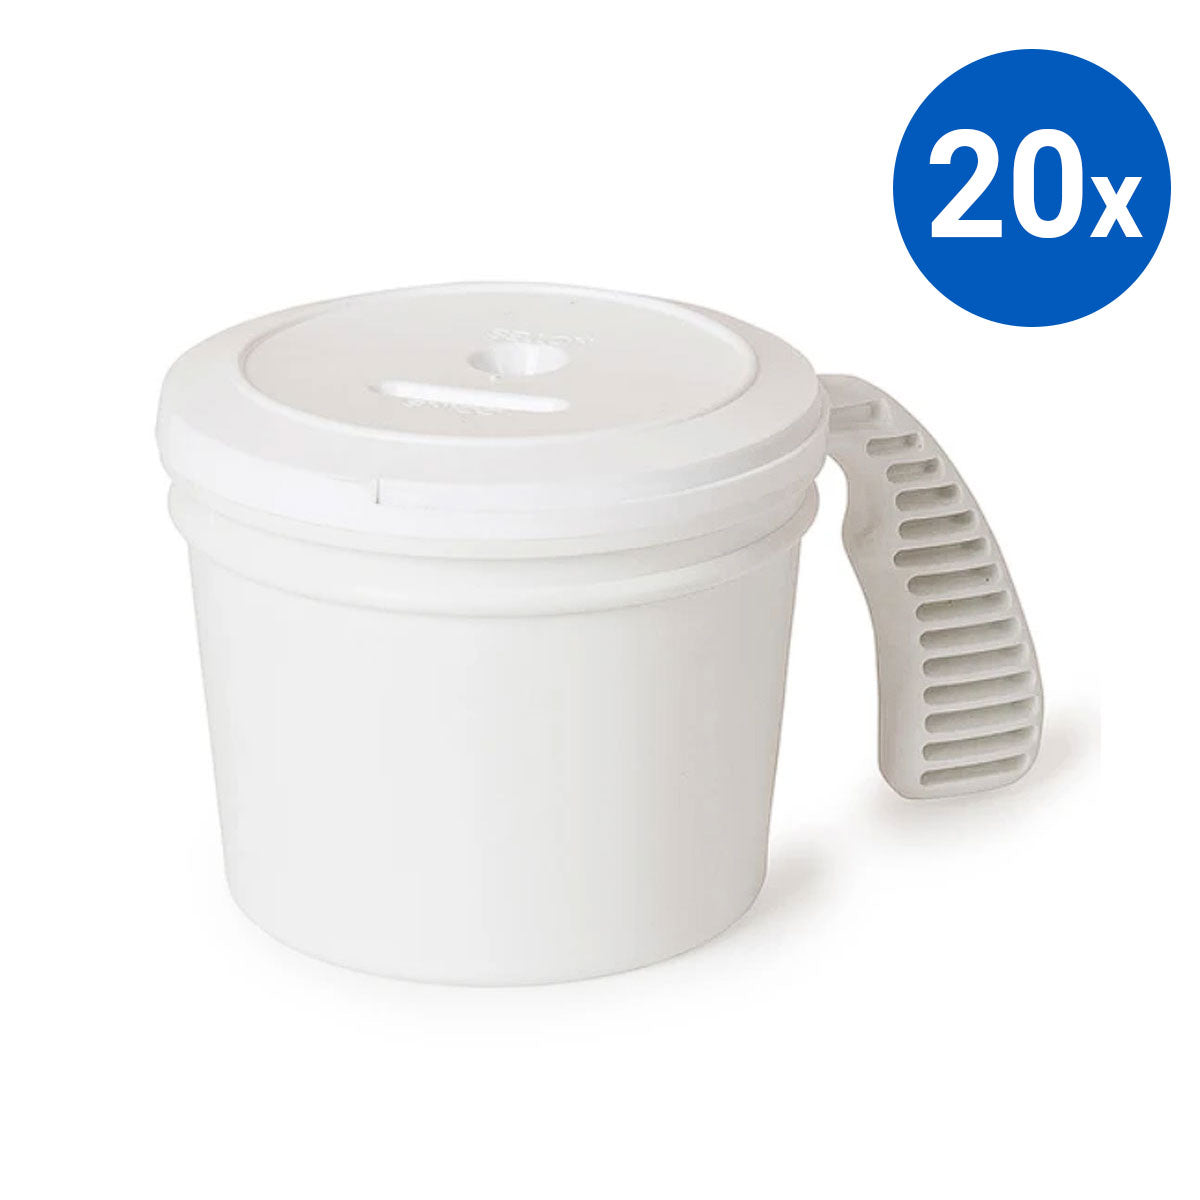 20x Collection Container Base and Standard Lid - White